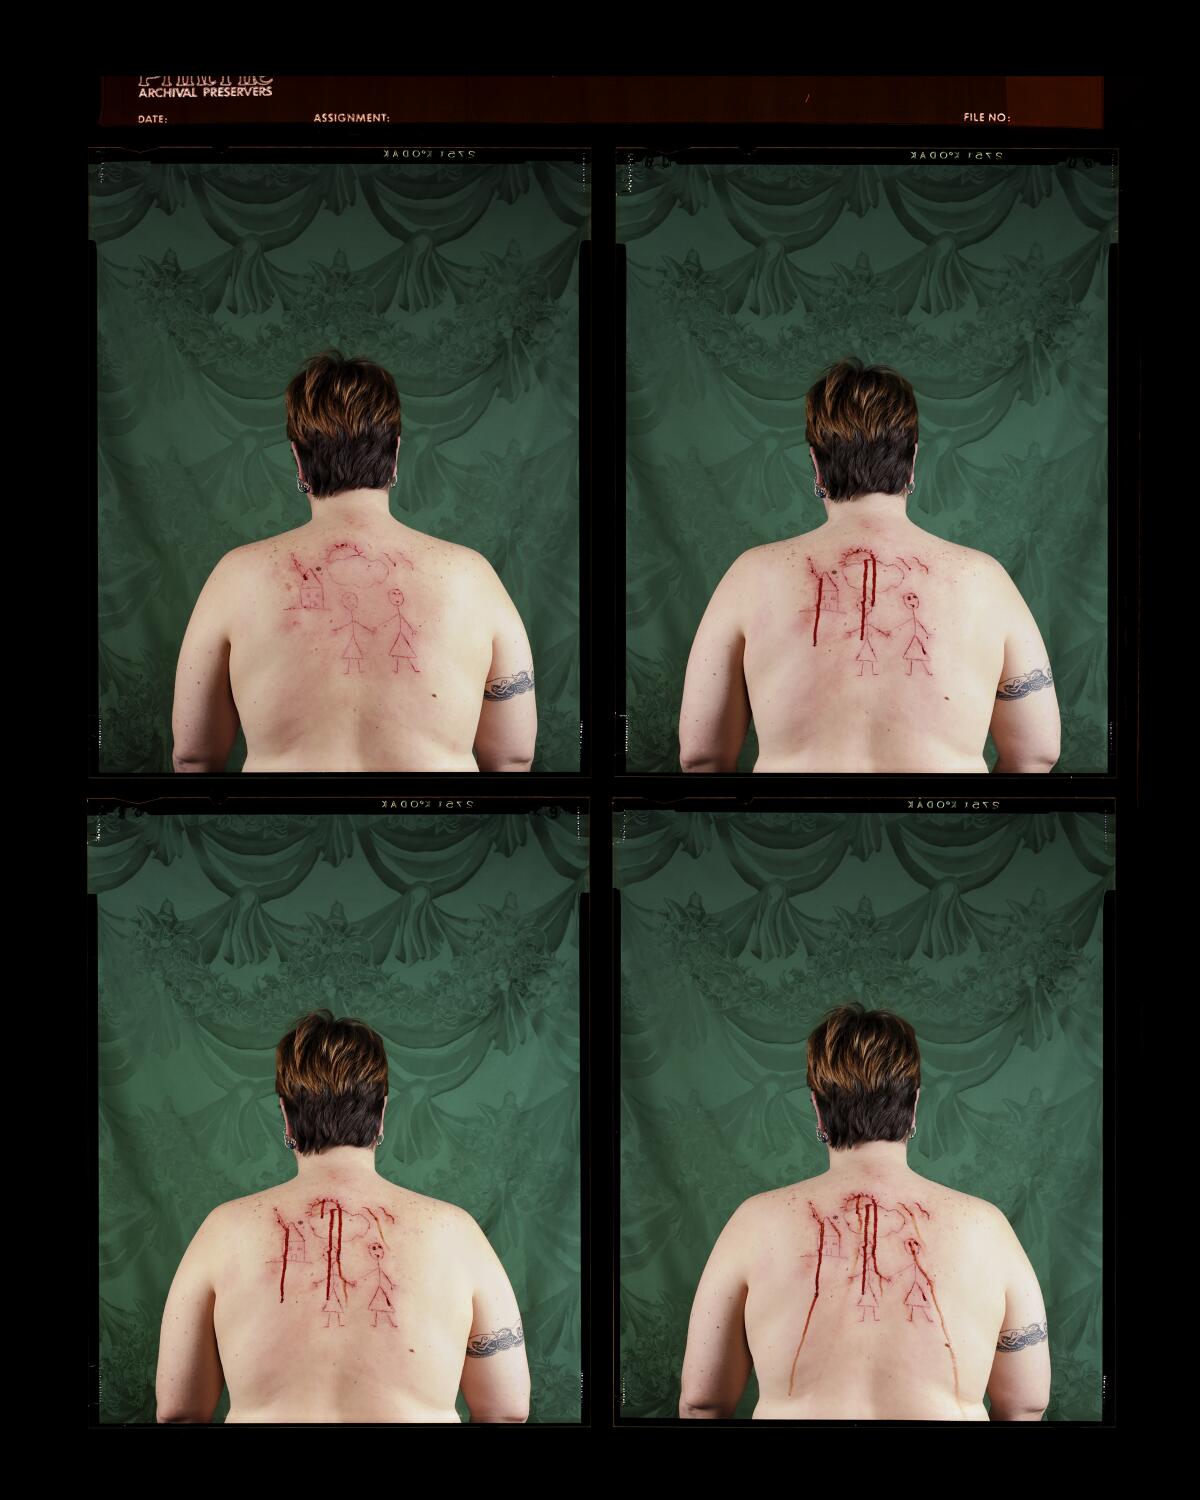 A contact sheet shows four images of a woman's bloody back.